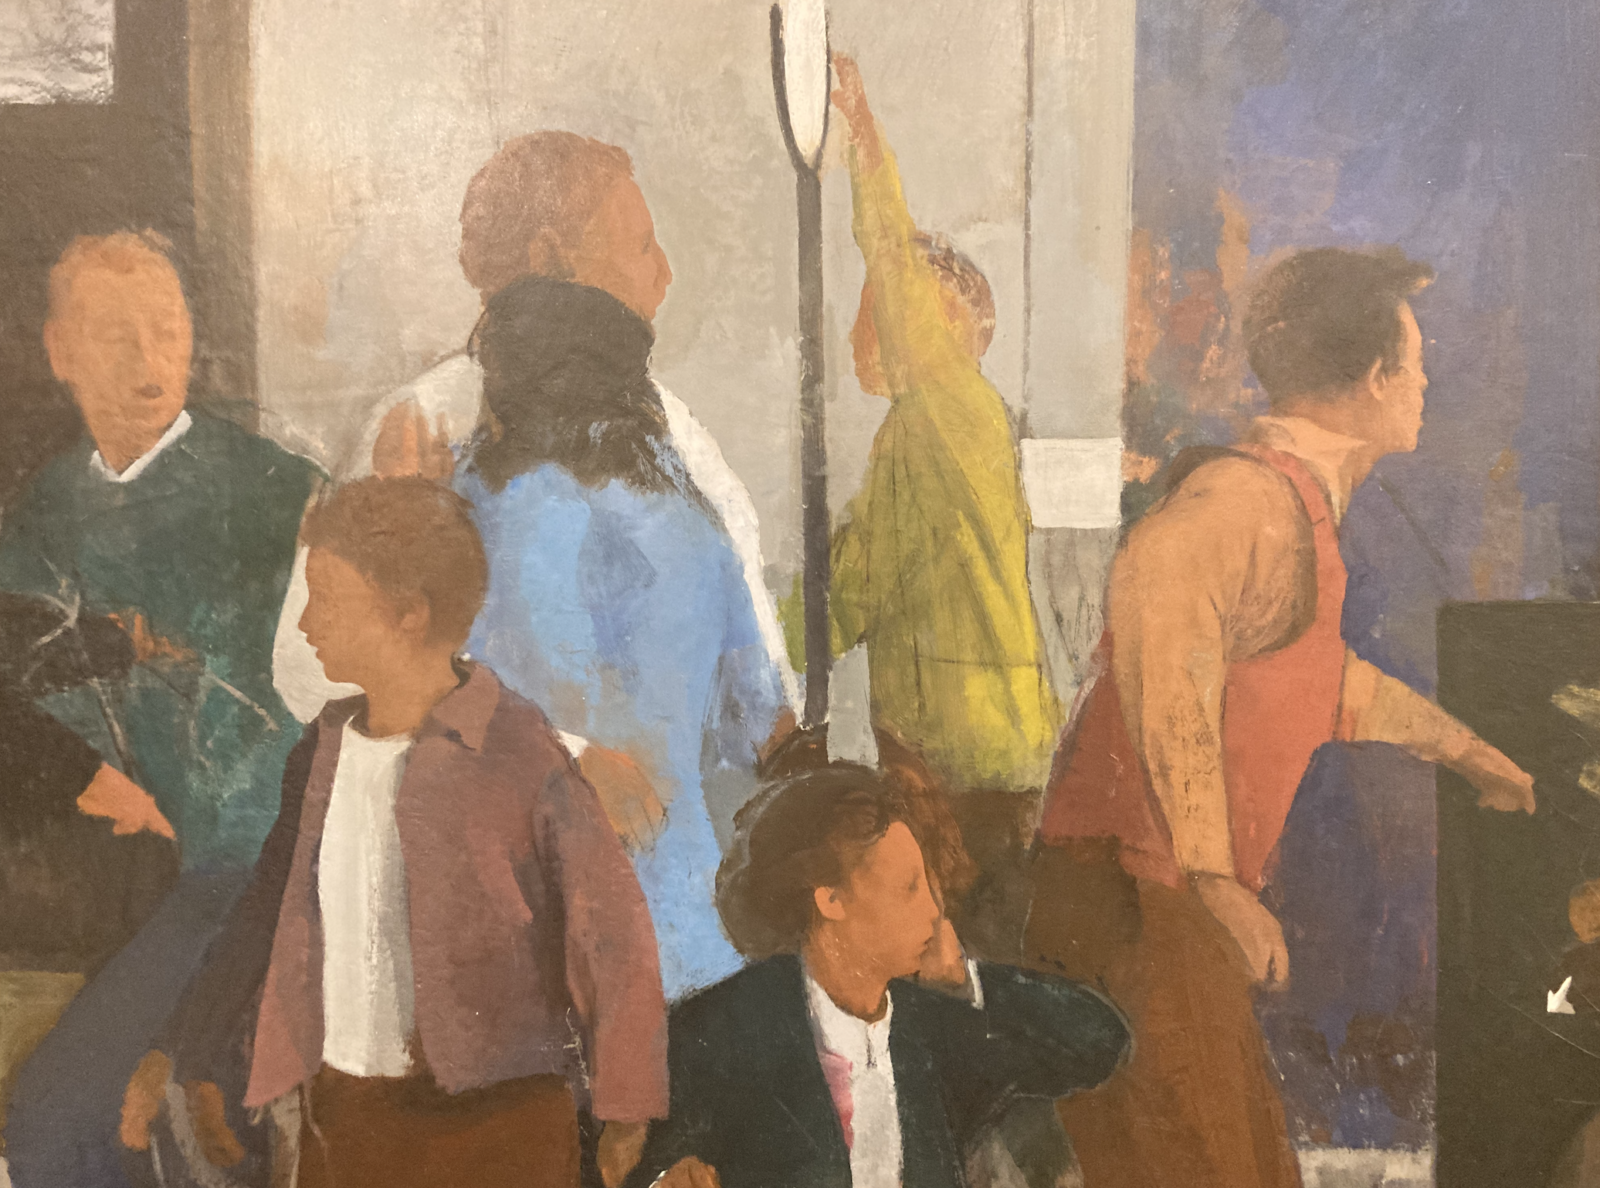 Detail of a large multi-figured painting showing a chaotic street scene with a diverse group of people in colorful clothing interacting with each other